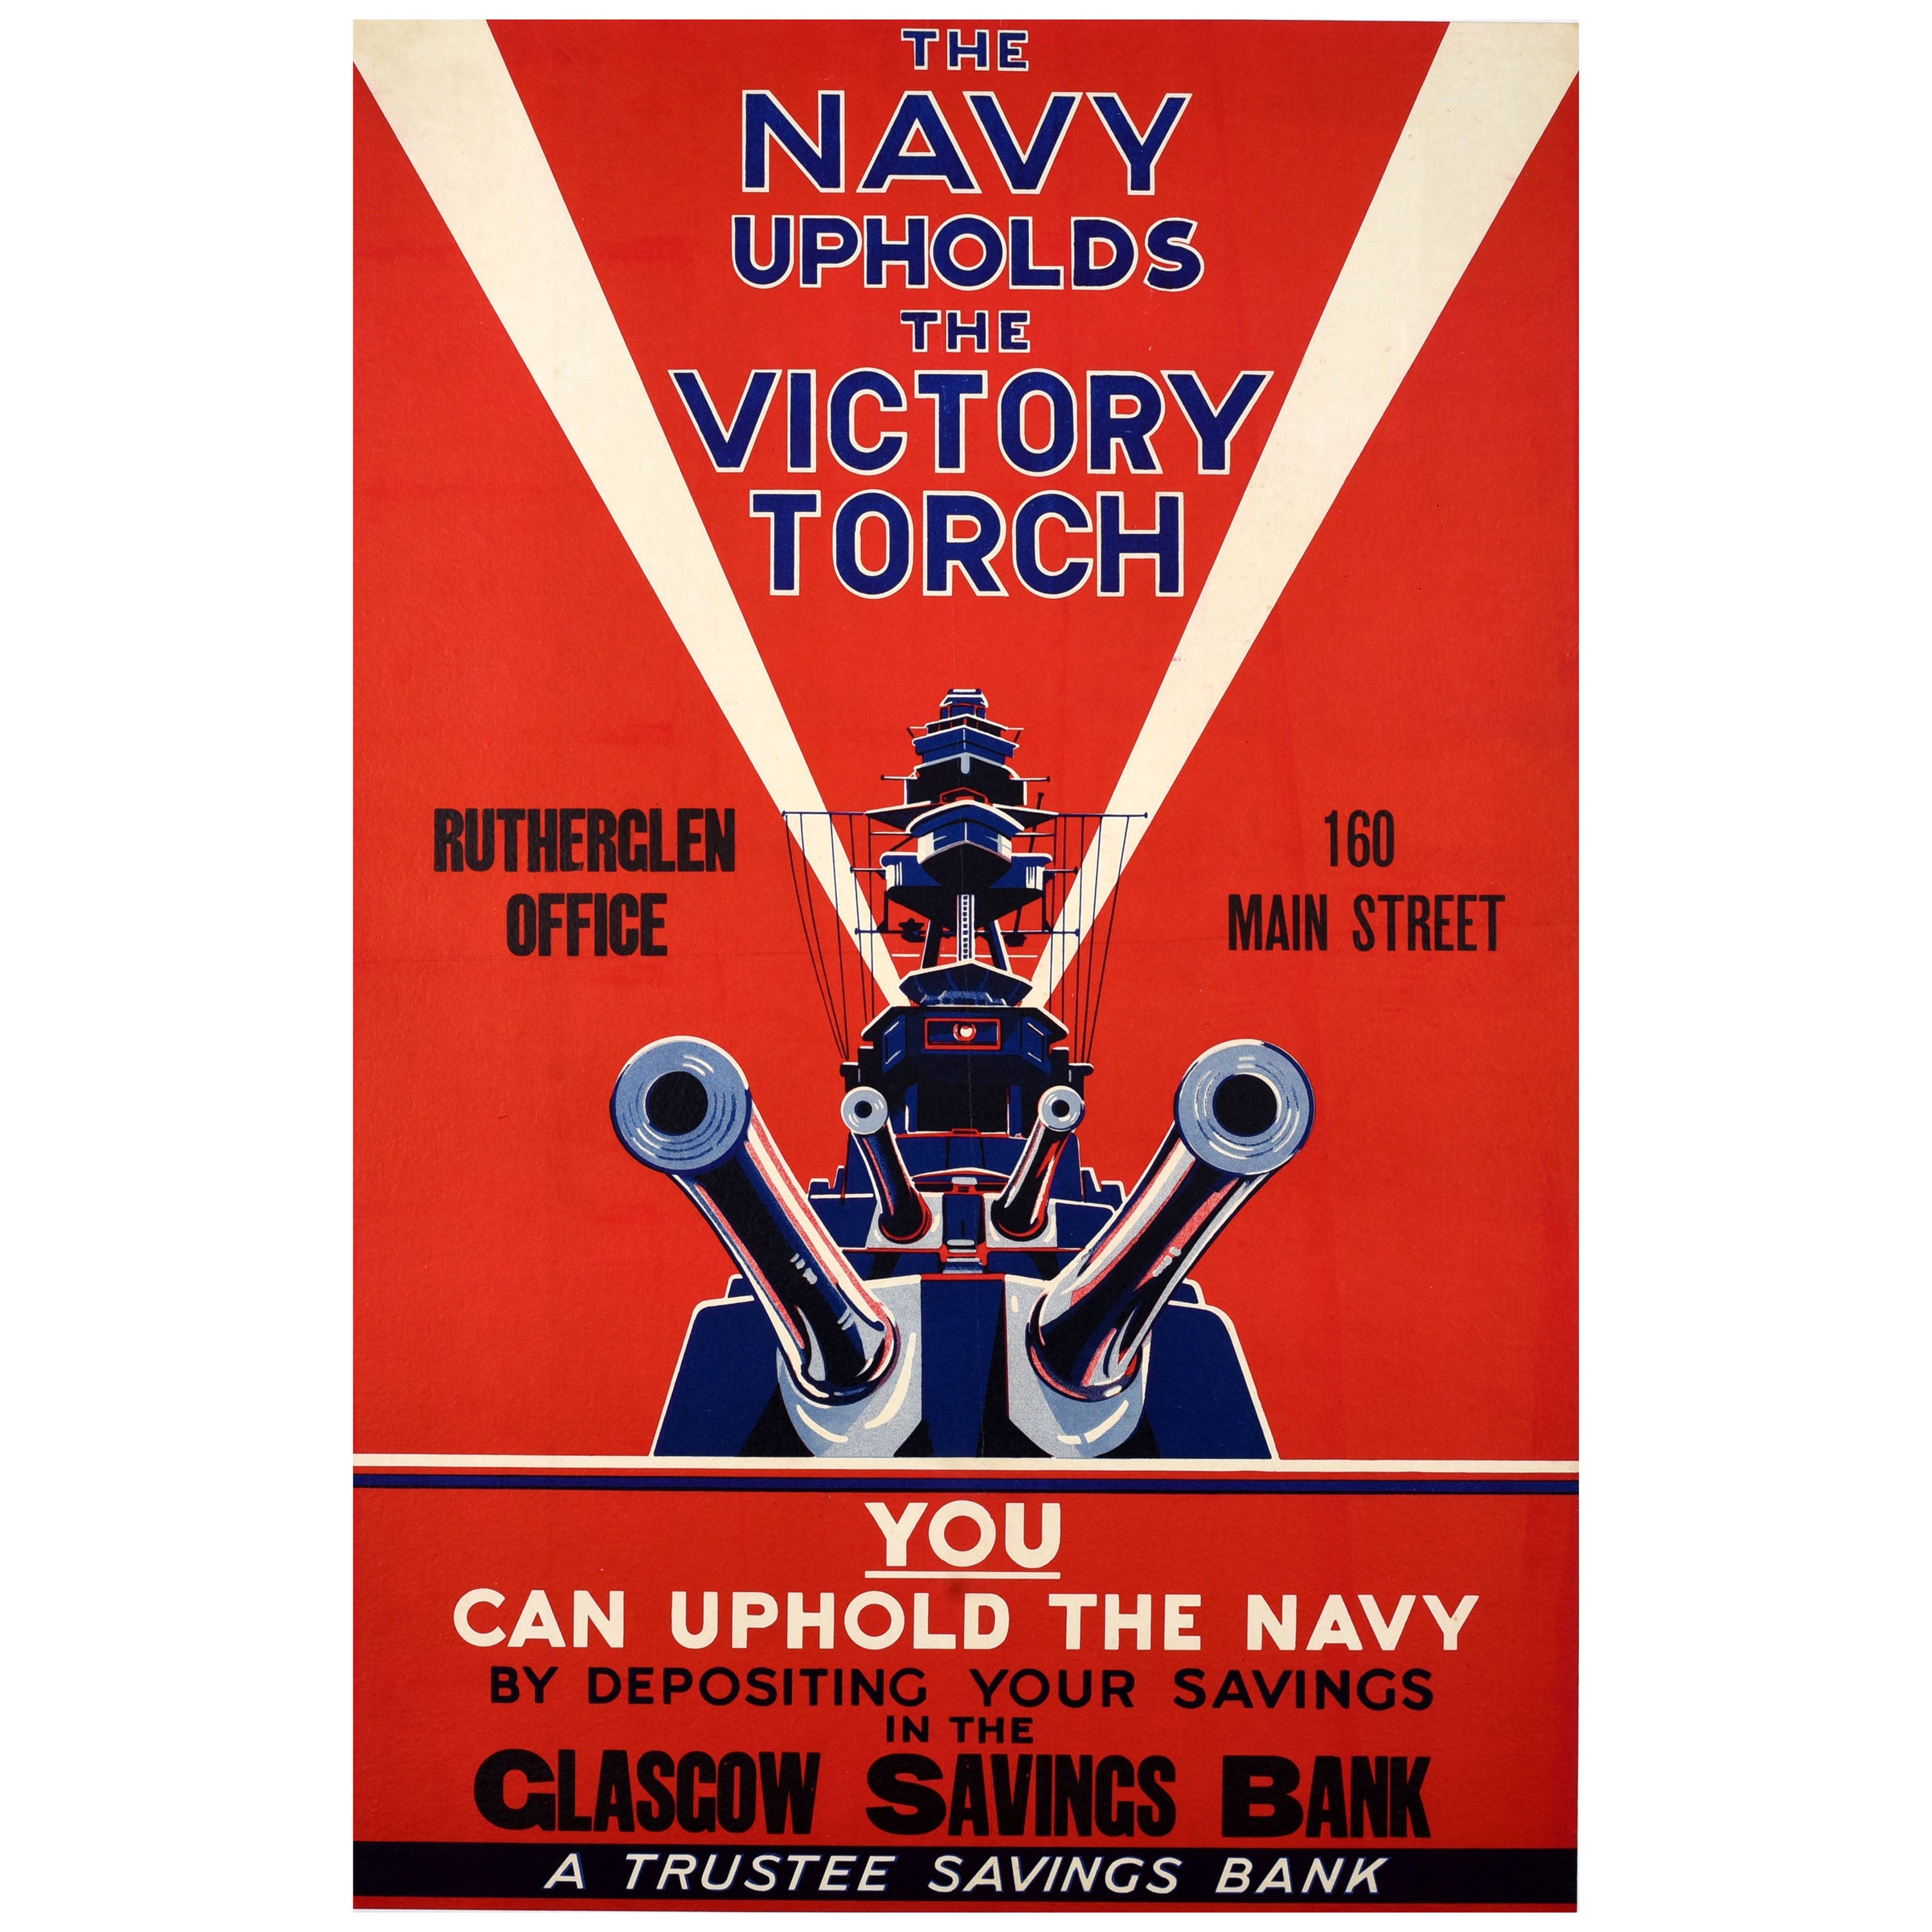 Original Vintage World War Two Propaganda Poster Navy Upholds Victory Torch WWII